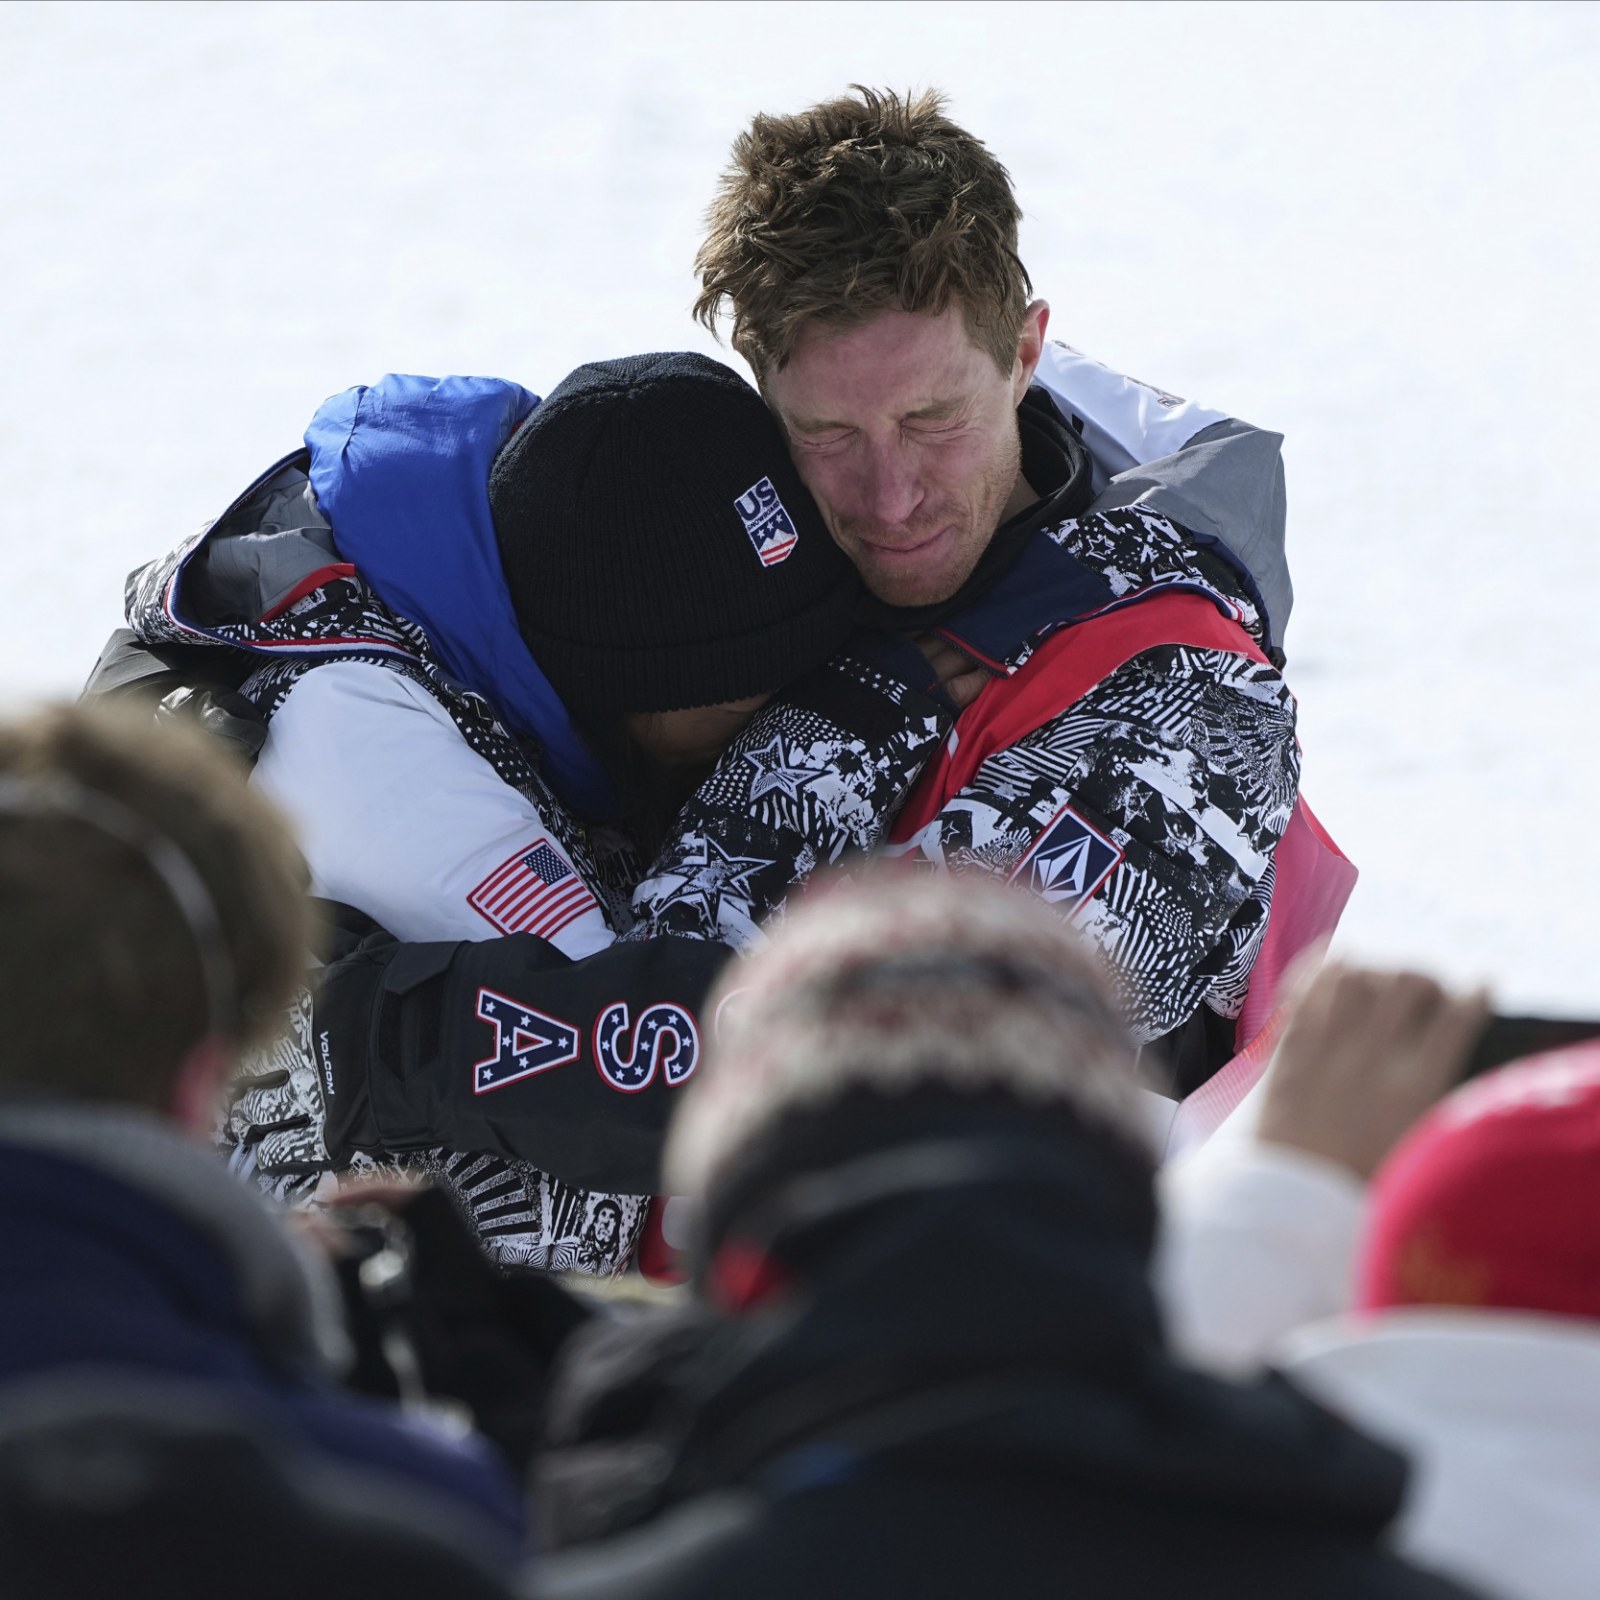 Shaun White looks ready for Winter Olympics with half-pipe podium